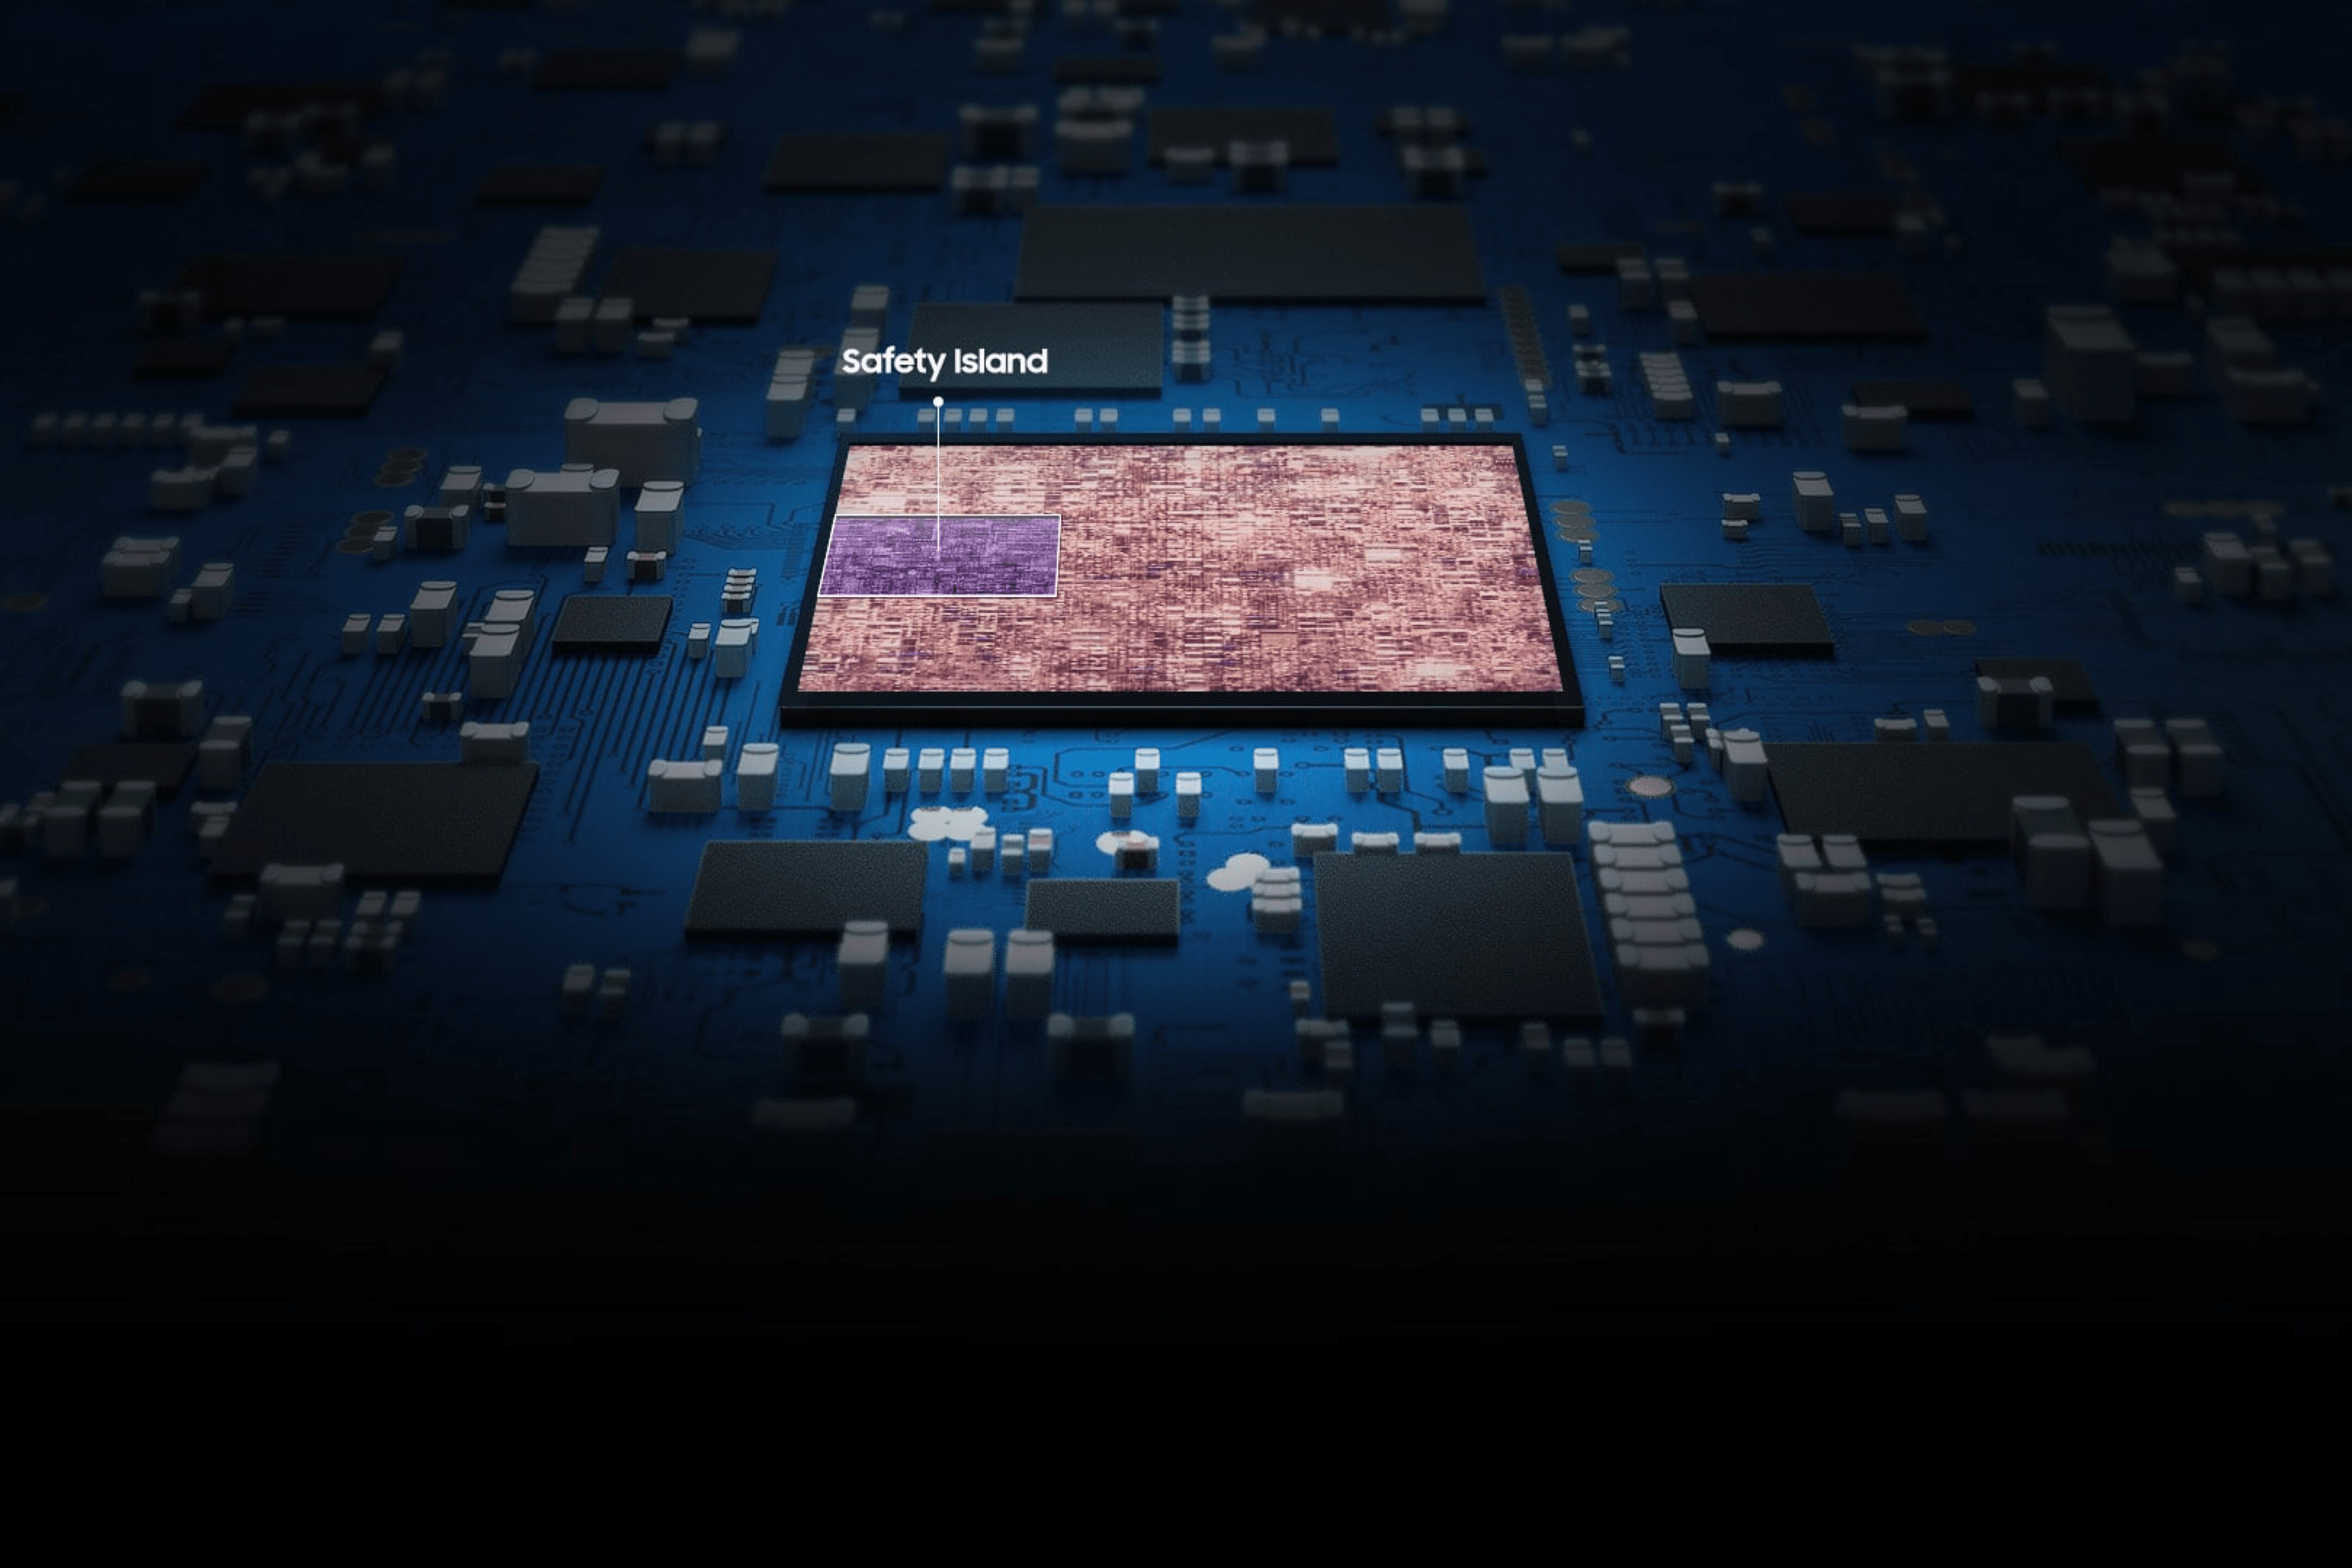 Samsung Exynos Auto V7 features a built-in safety island that detects and manages system failures to maintain safety.